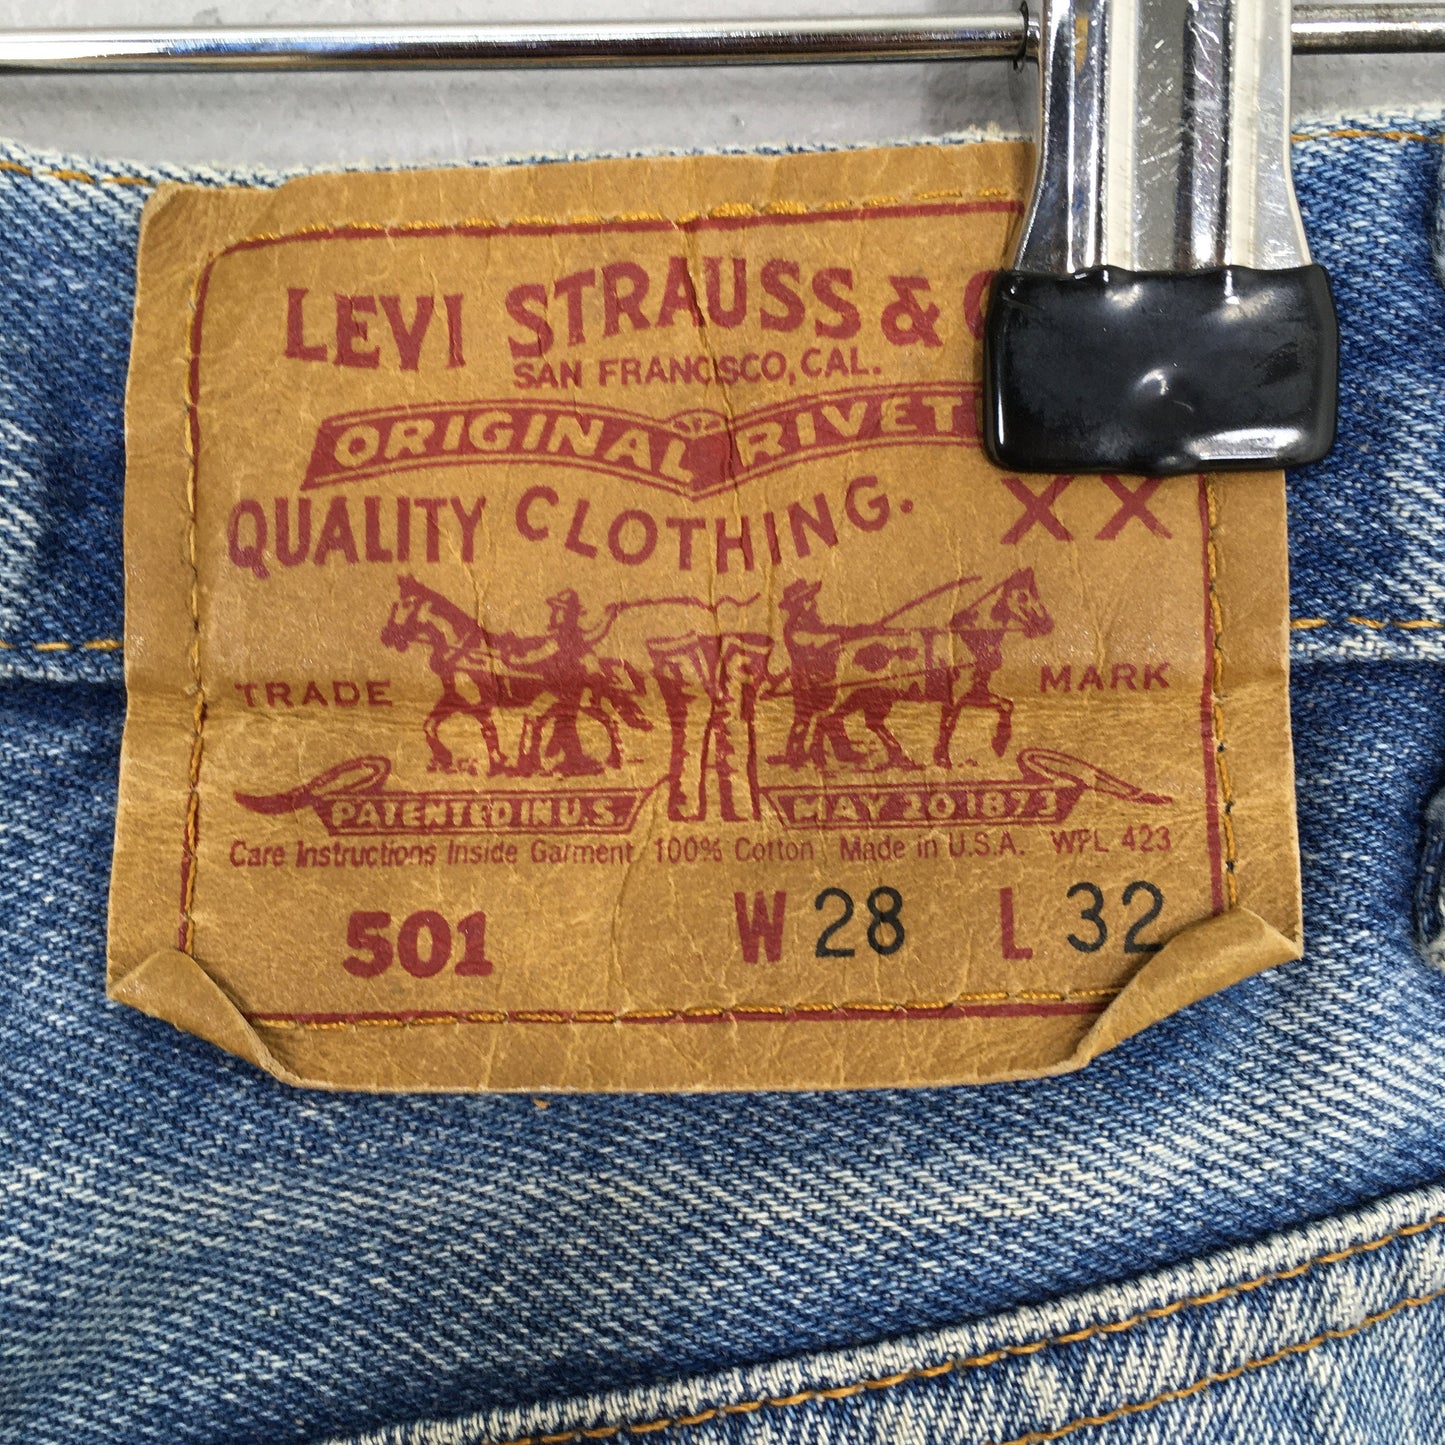 Levi's 501 Light Wash Jeans Faded Size 27x28